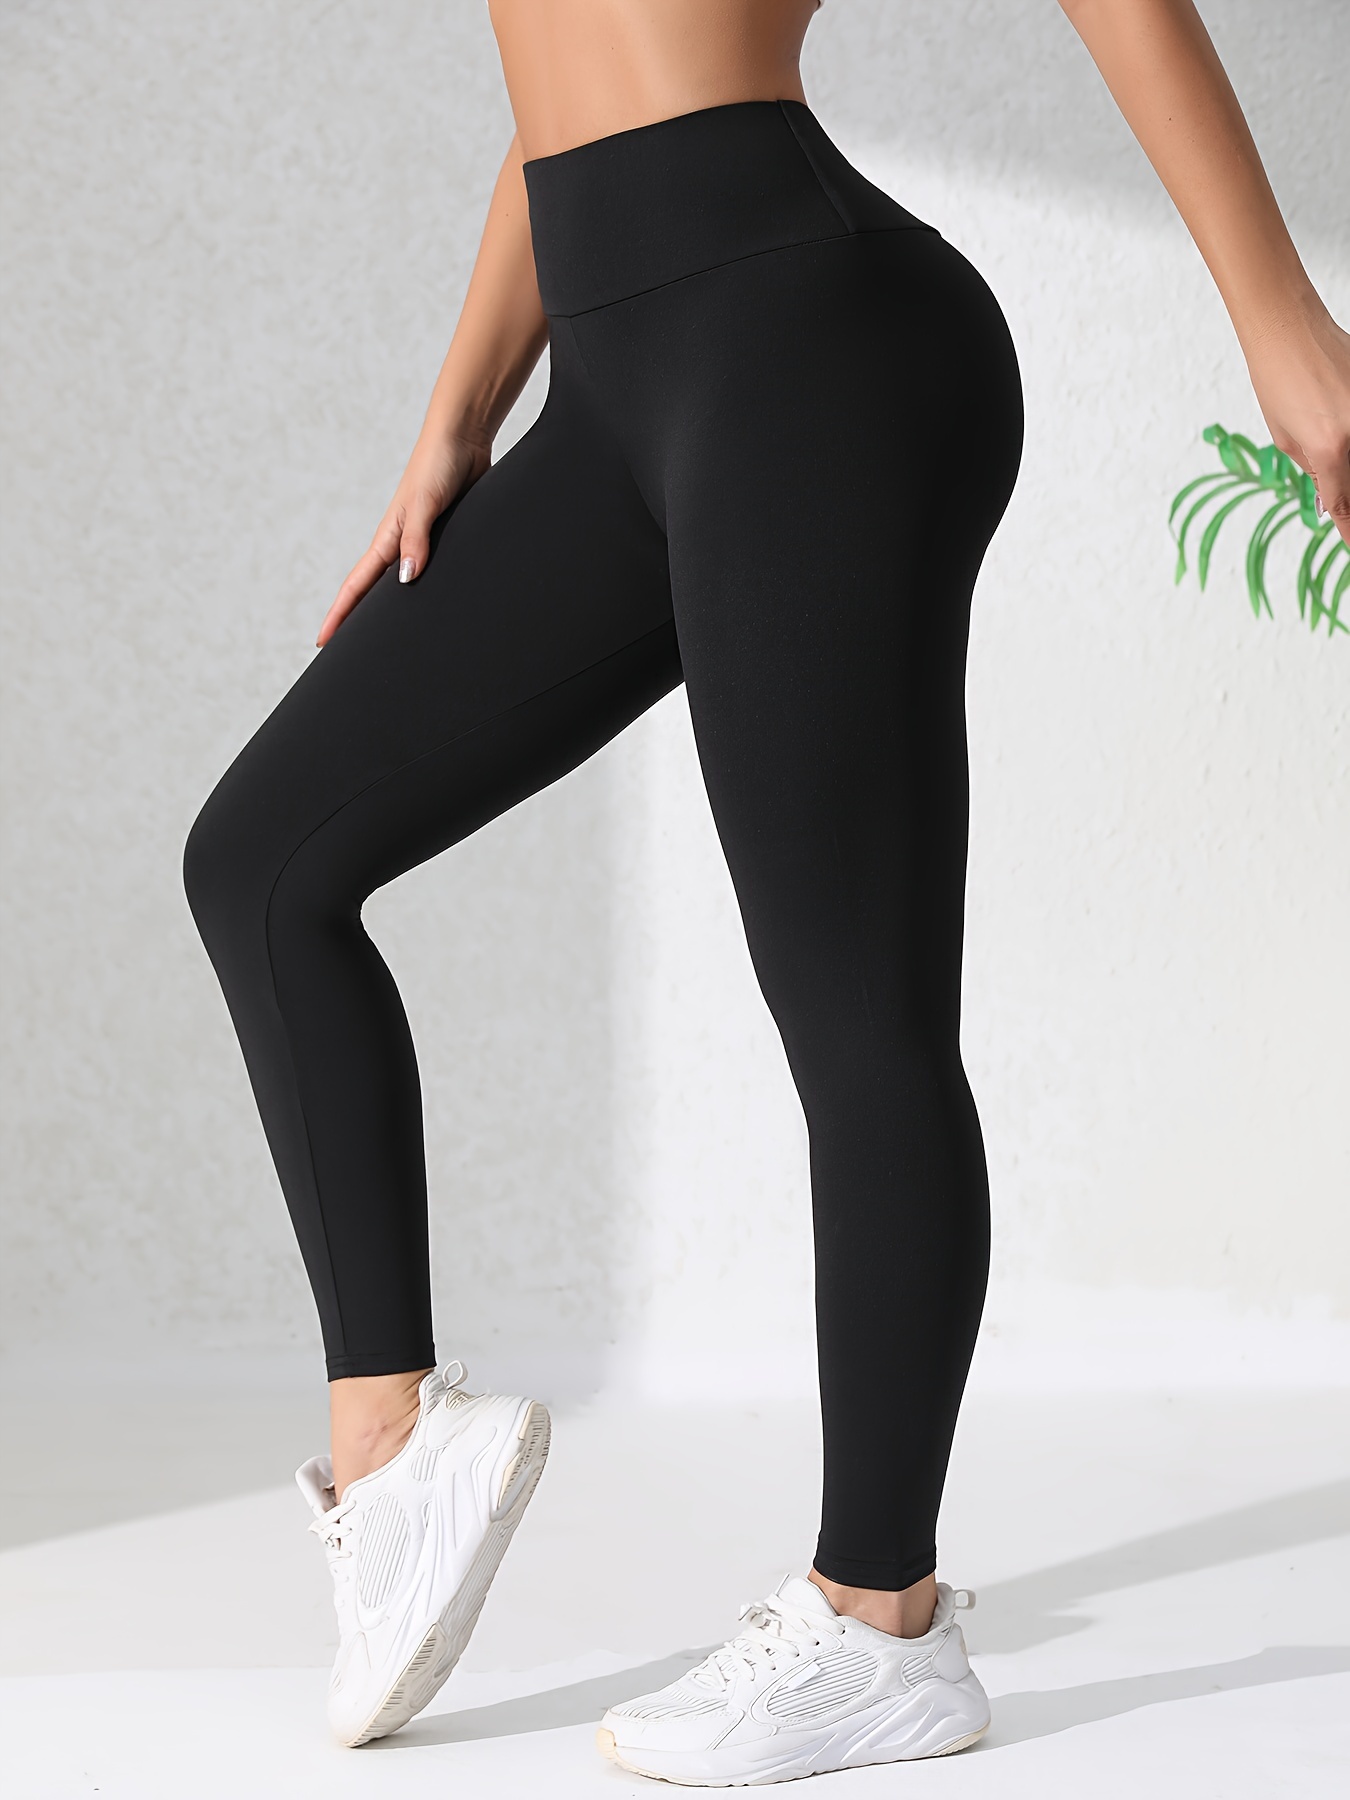 Yoga Leggings for Women Tummy Control Workout Pants High Waisted